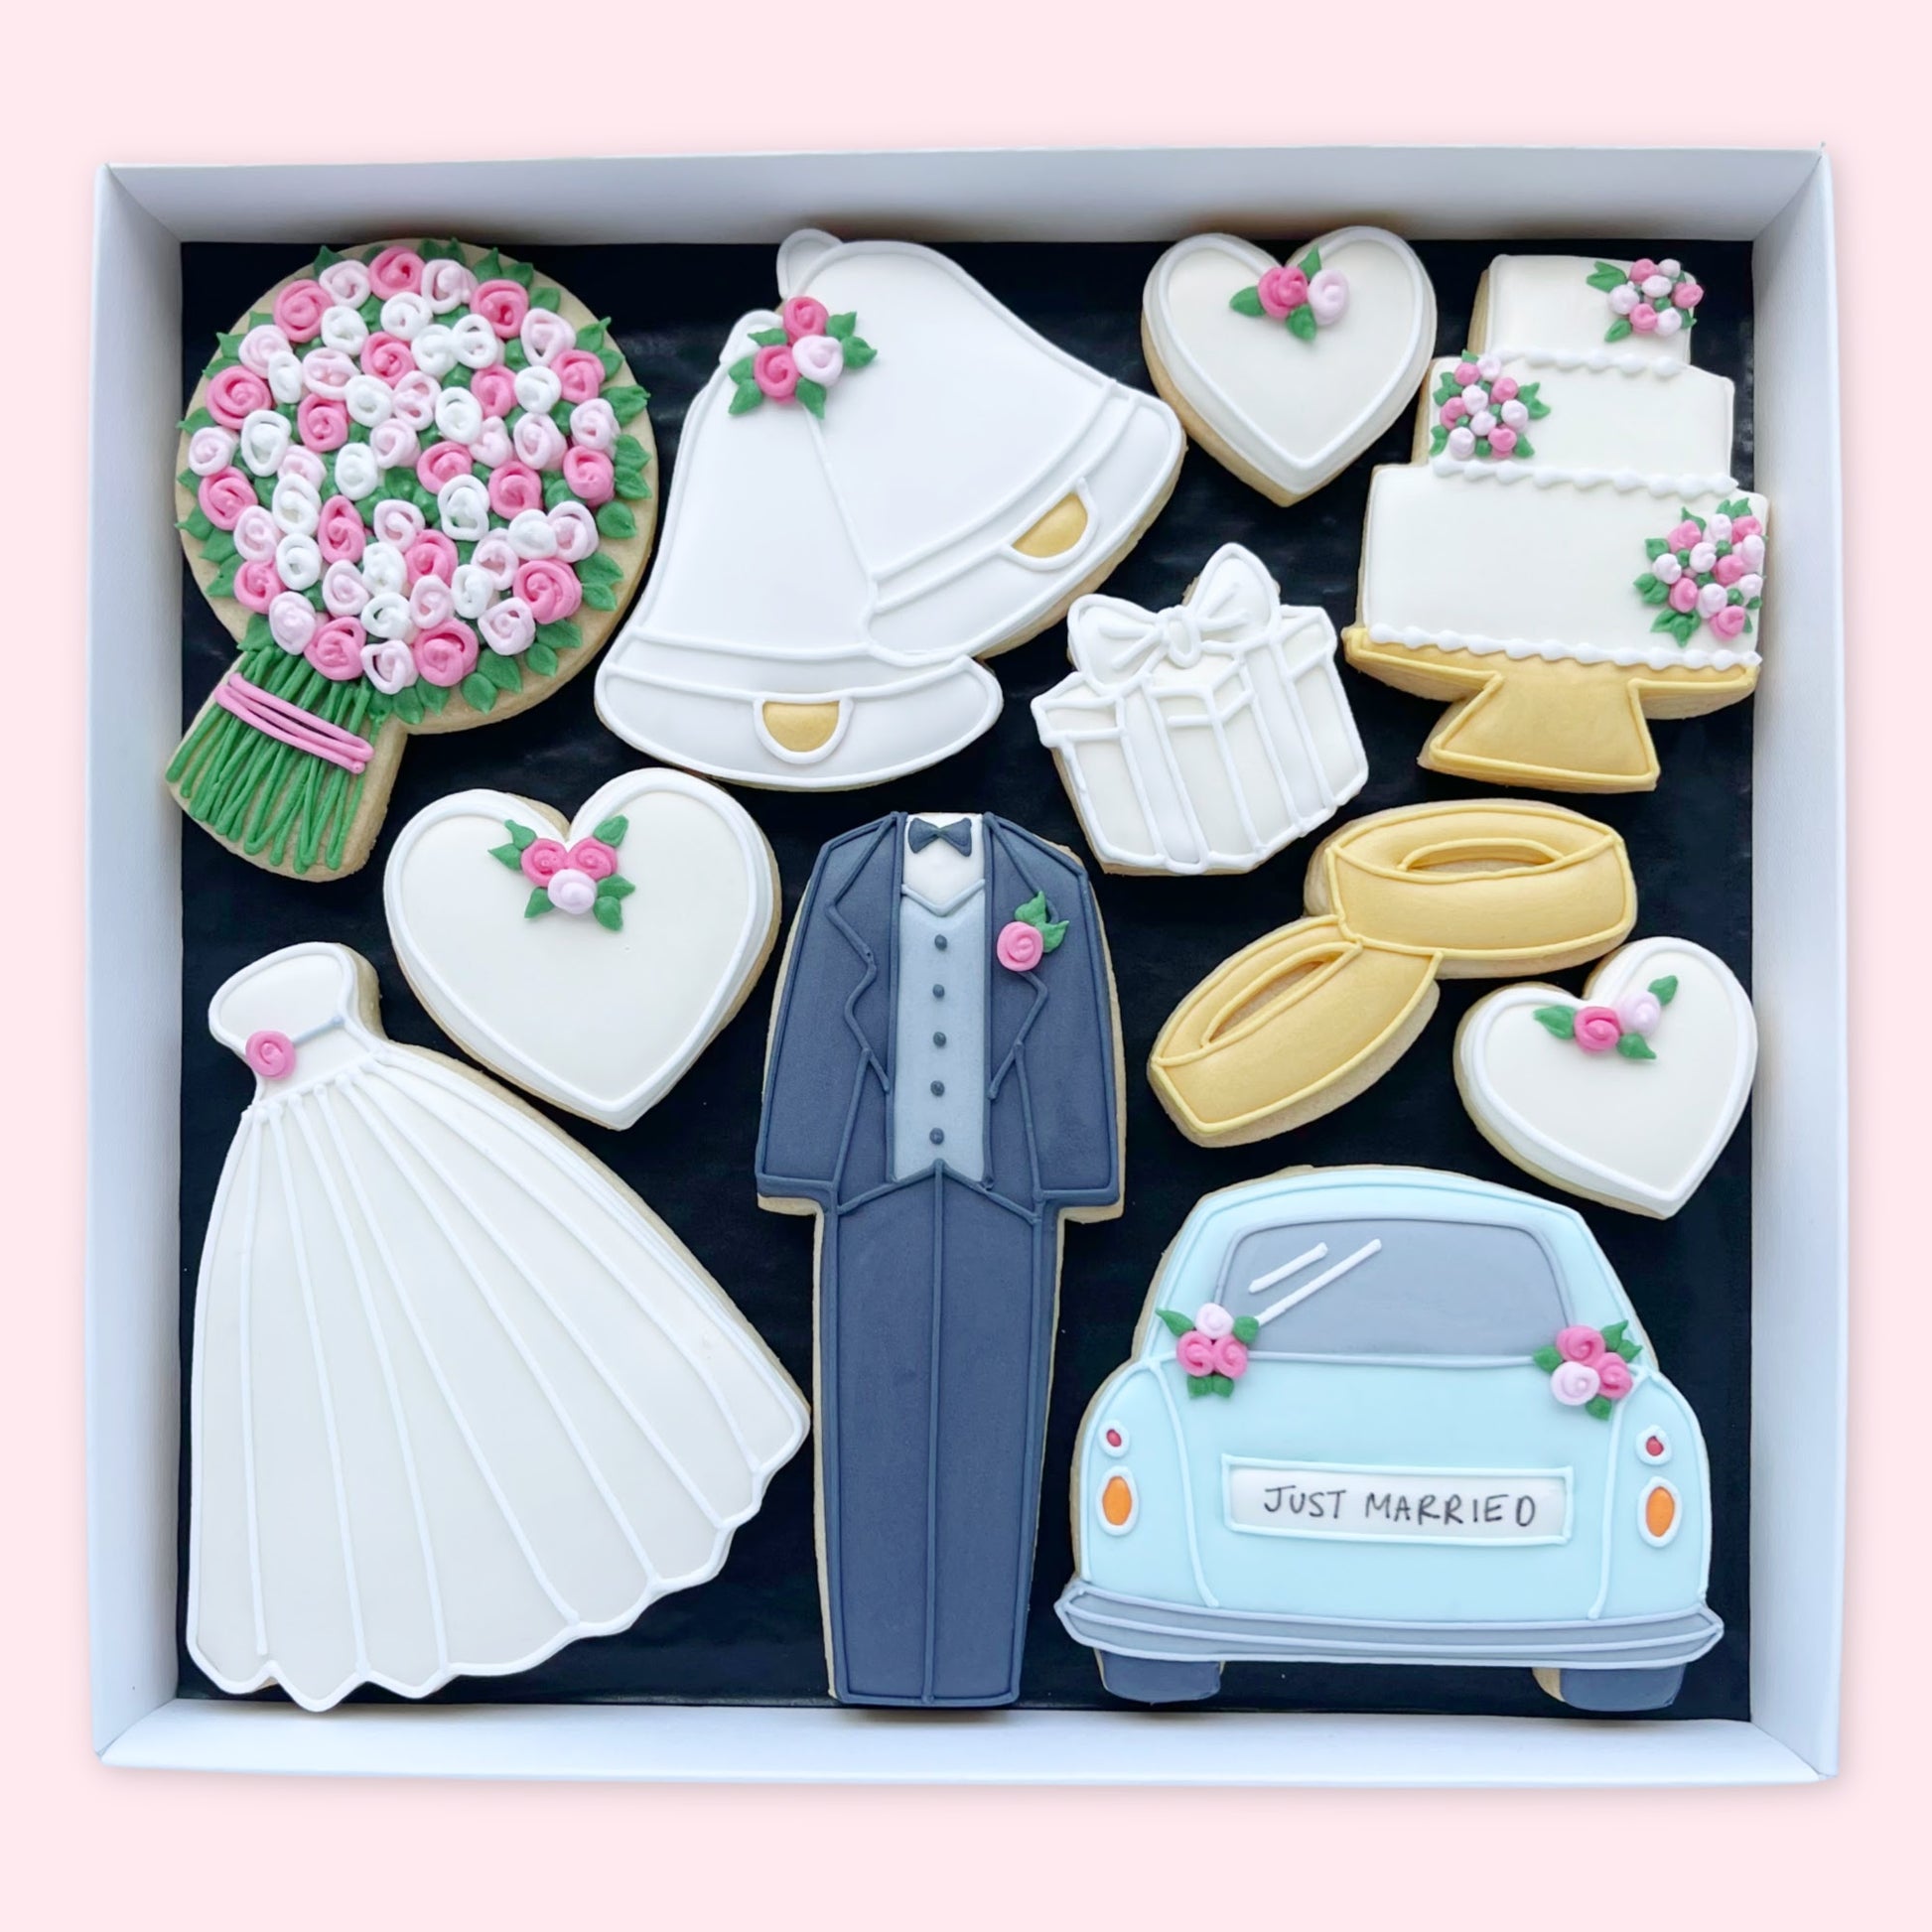 Hand Iced wedding day theme biscuits in an open white gift box by Katie's Biscuit shop